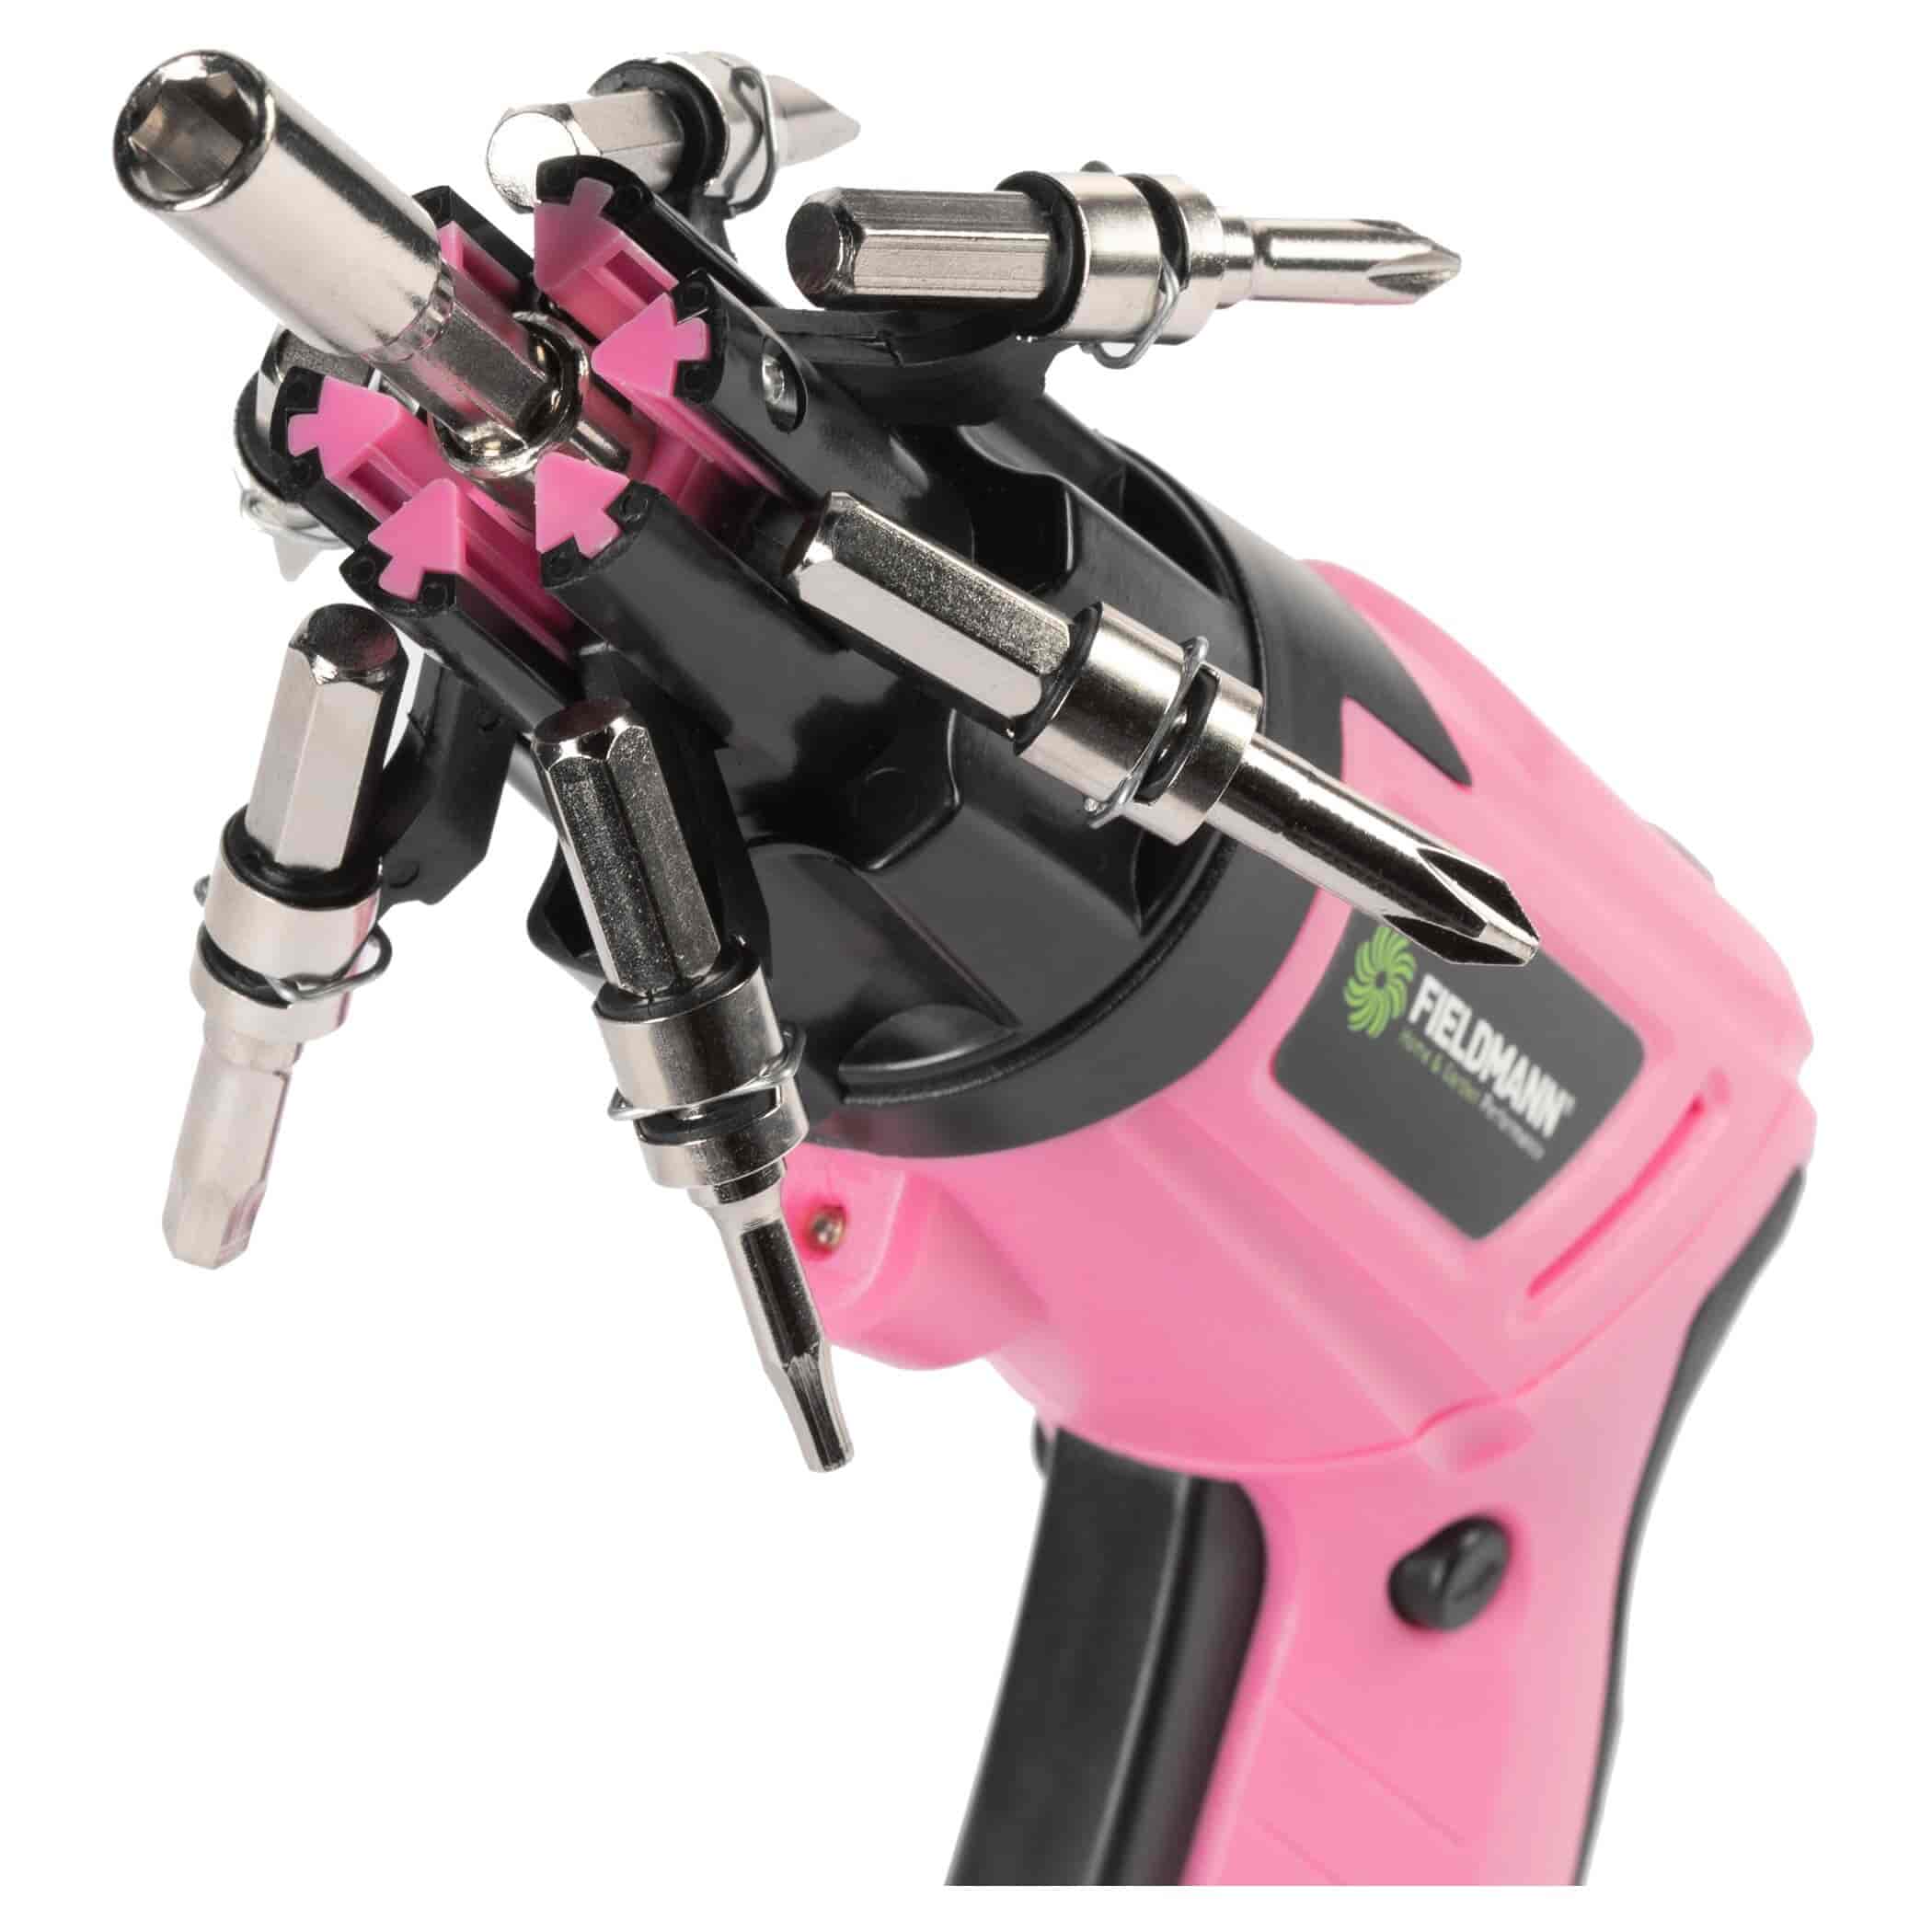 Cordless screwdriver Pink 3.6VExperience the ultimate power and convenience with the FIELDMANN FDS 10112-A Cordless Screwdriver – your reliable partner in any DIY task! In a fresh and eye-catching pink color, this cordless screwdriver is not just a power tool, it's also a statement piece for your toolbox. Whether it's furniture assembly, repairs, or other DIY tasks, this screwdriver is your dependable companion.Fieldmann